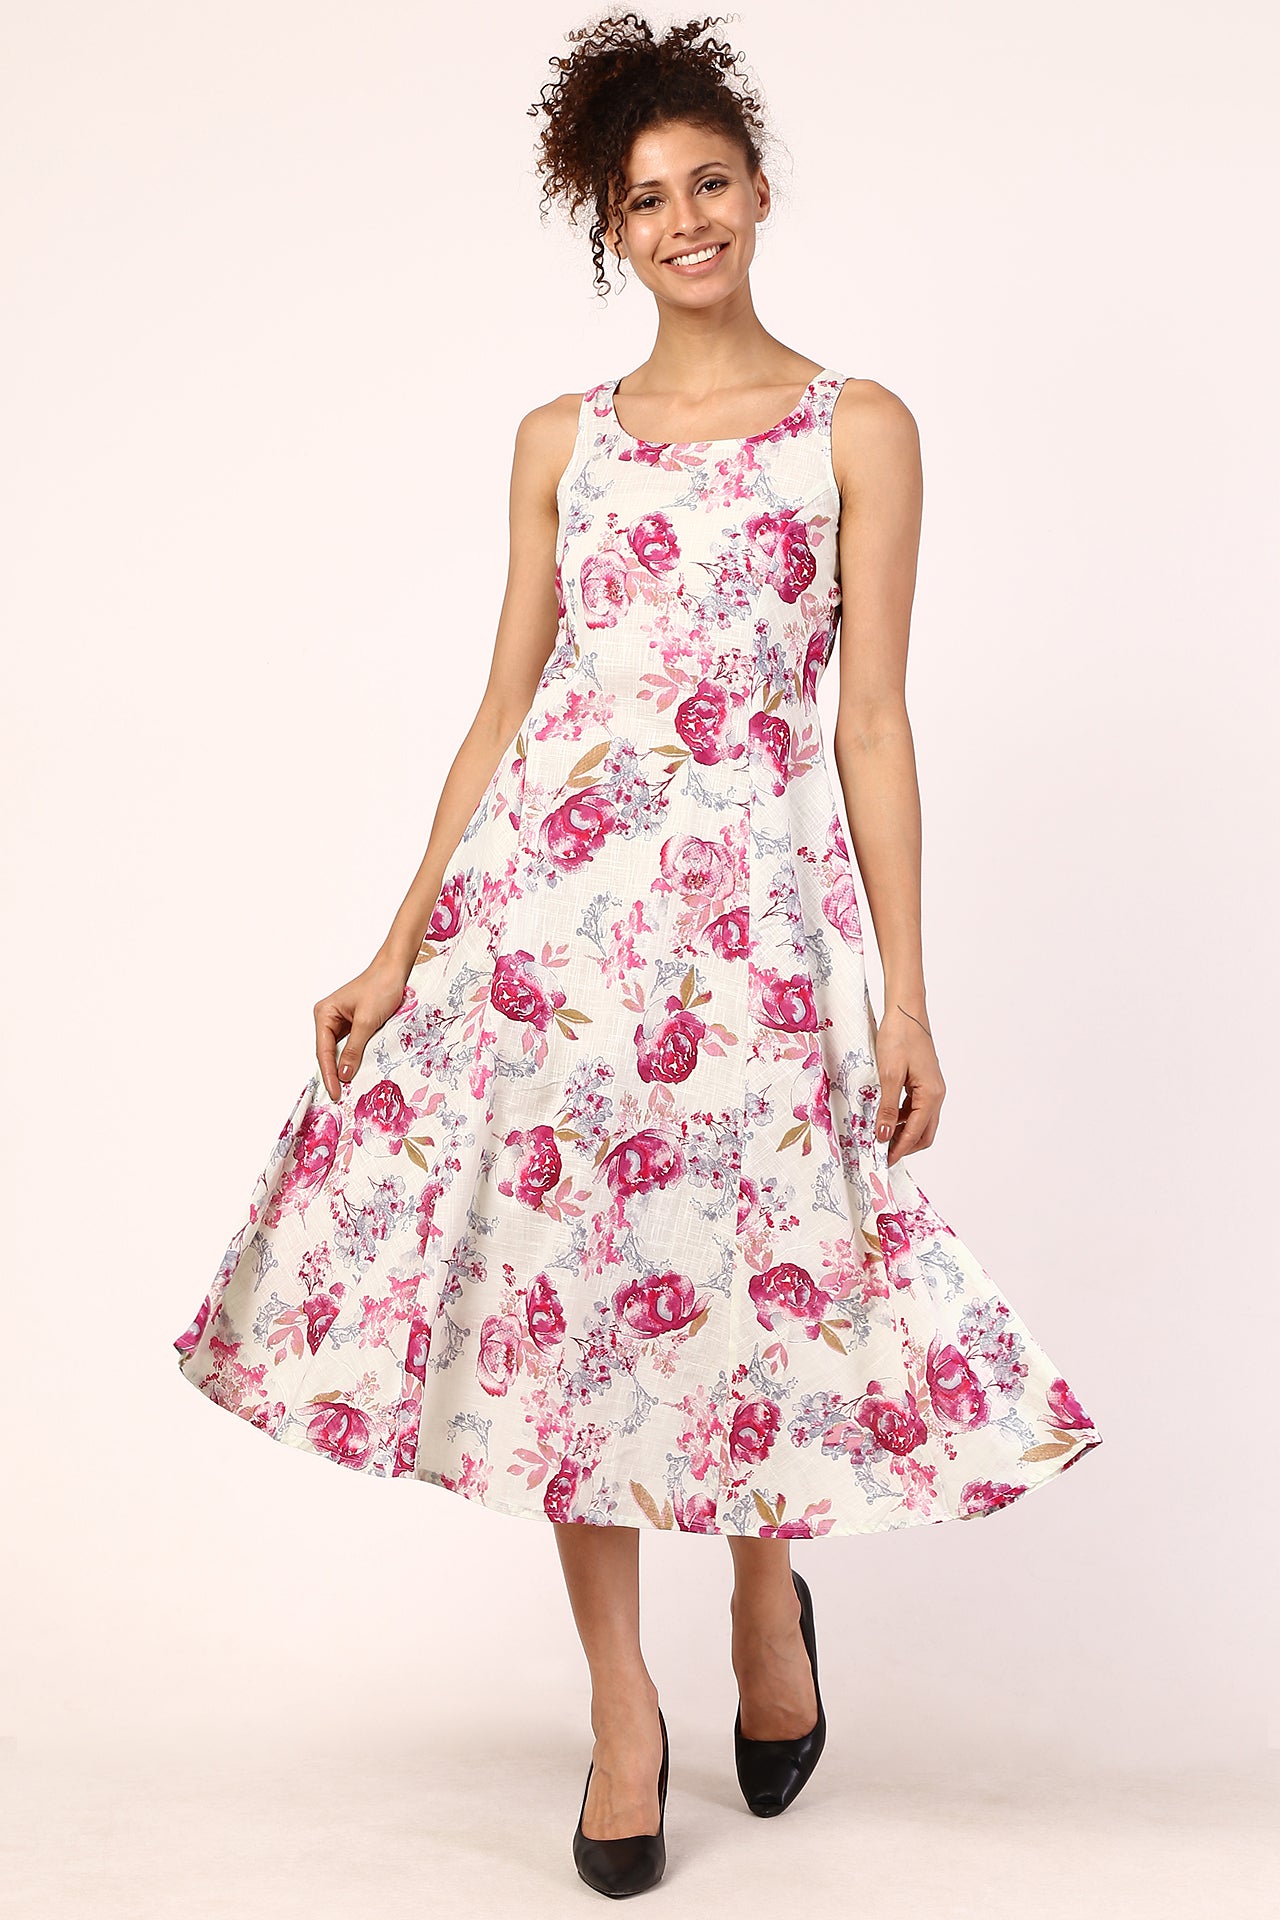 AMODINI OFF-WHITE AND PINK FLORAL COTTON ANKLE LENGTH DRESS